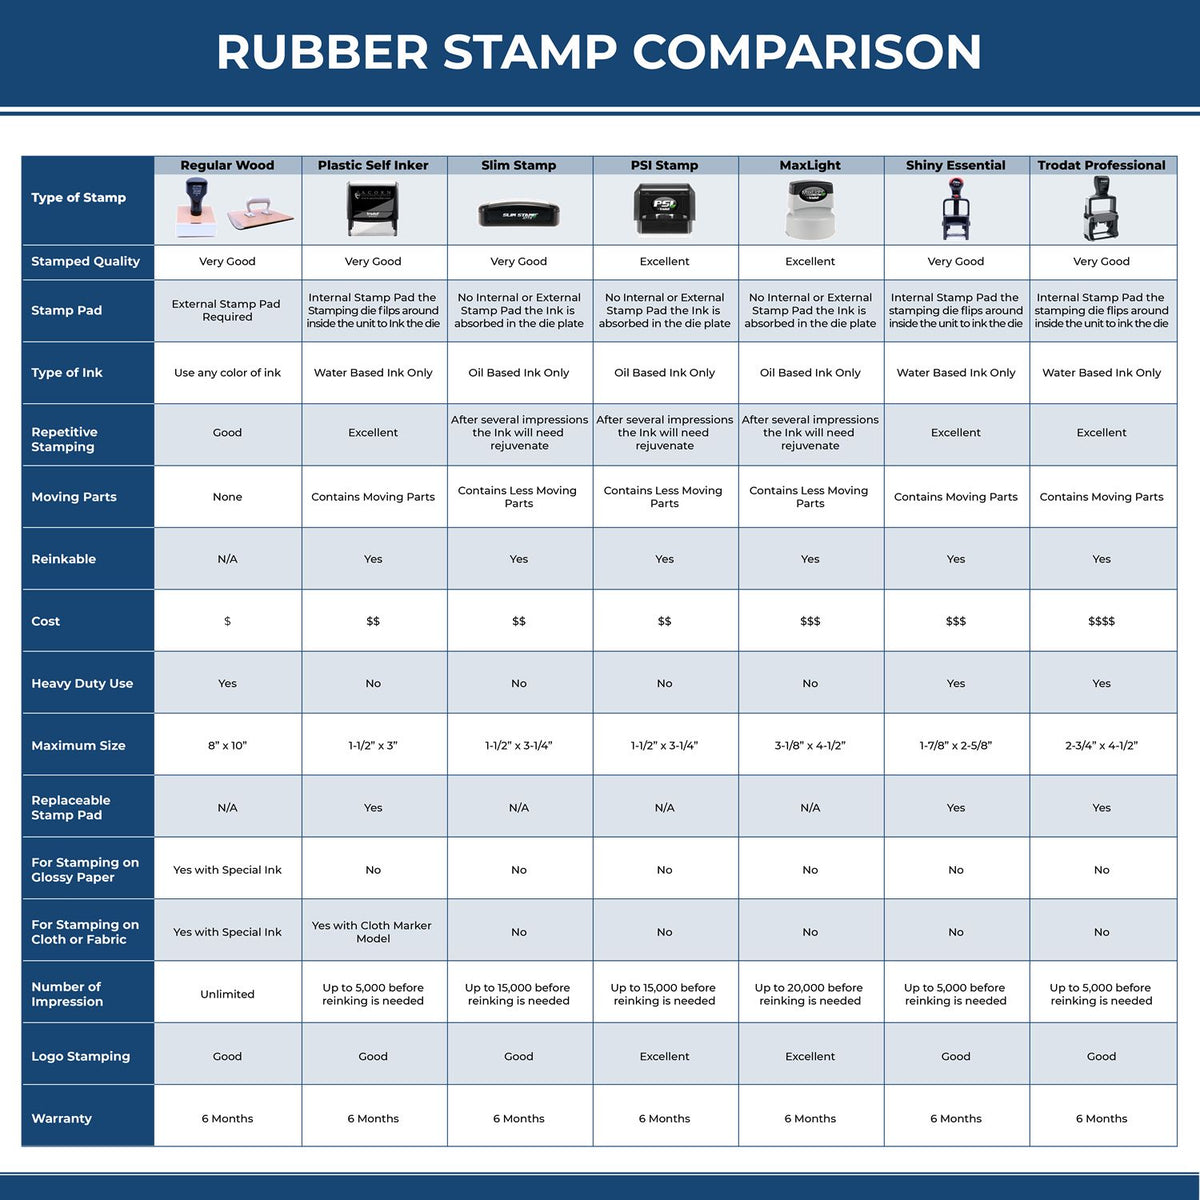 Large Pre-Inked Please Pay Now No Statements will be Sent Stamp 4909SLIM Rubber Stamp Comparison